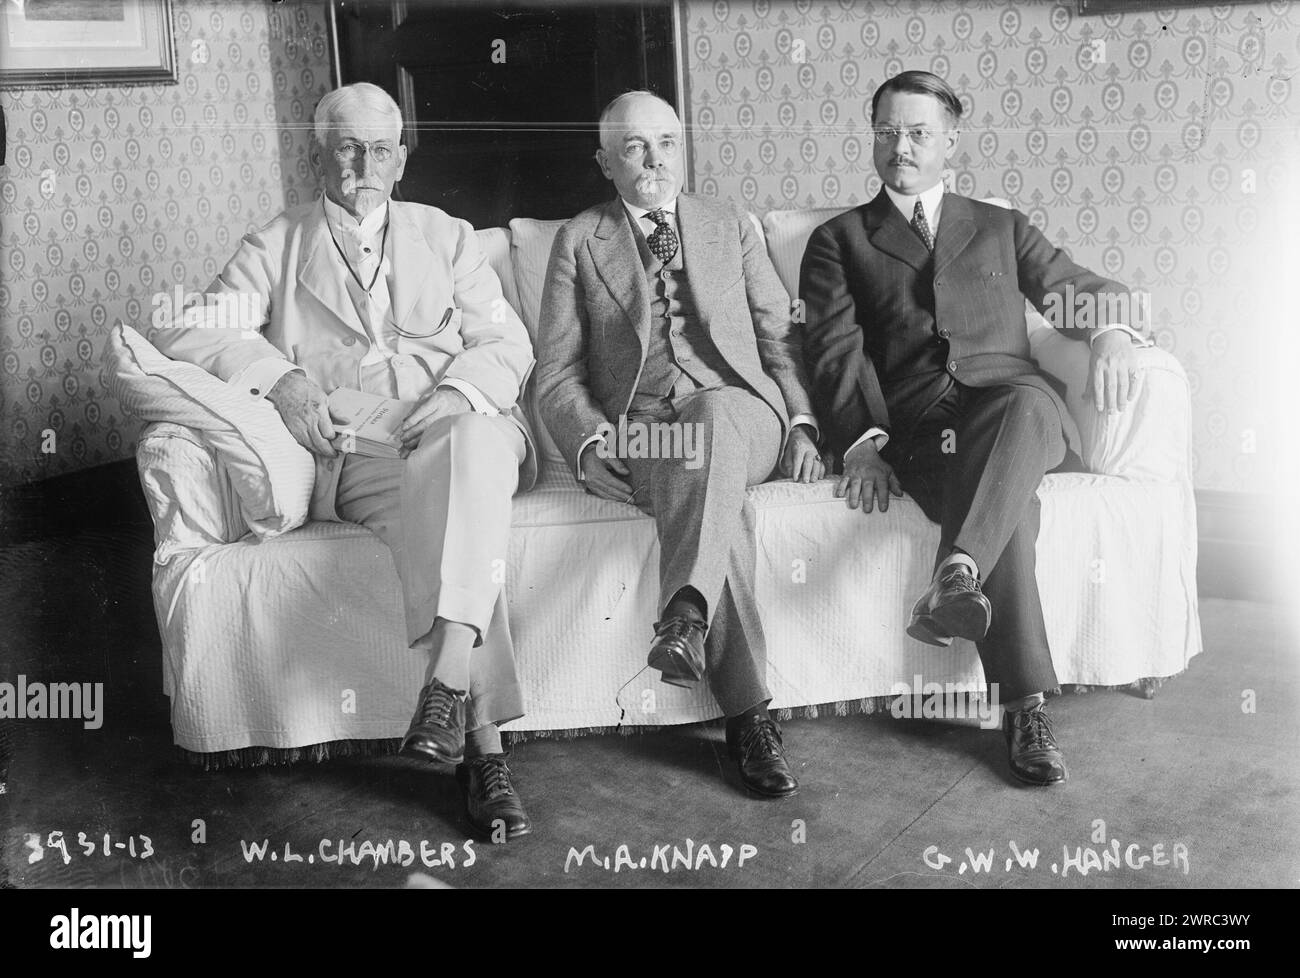 W.L. Chambers, M.A. Knapp, G.W.W. Hanger, Photo shows members of the U.S. Board of Mediation and Conciliation for the settlement of disputes between railroads and their employees including Martin A. Knapp, William Lea Chambers, and George W.W. Hangar., 1916, Glass negatives, 1 negative: glass Stock Photo